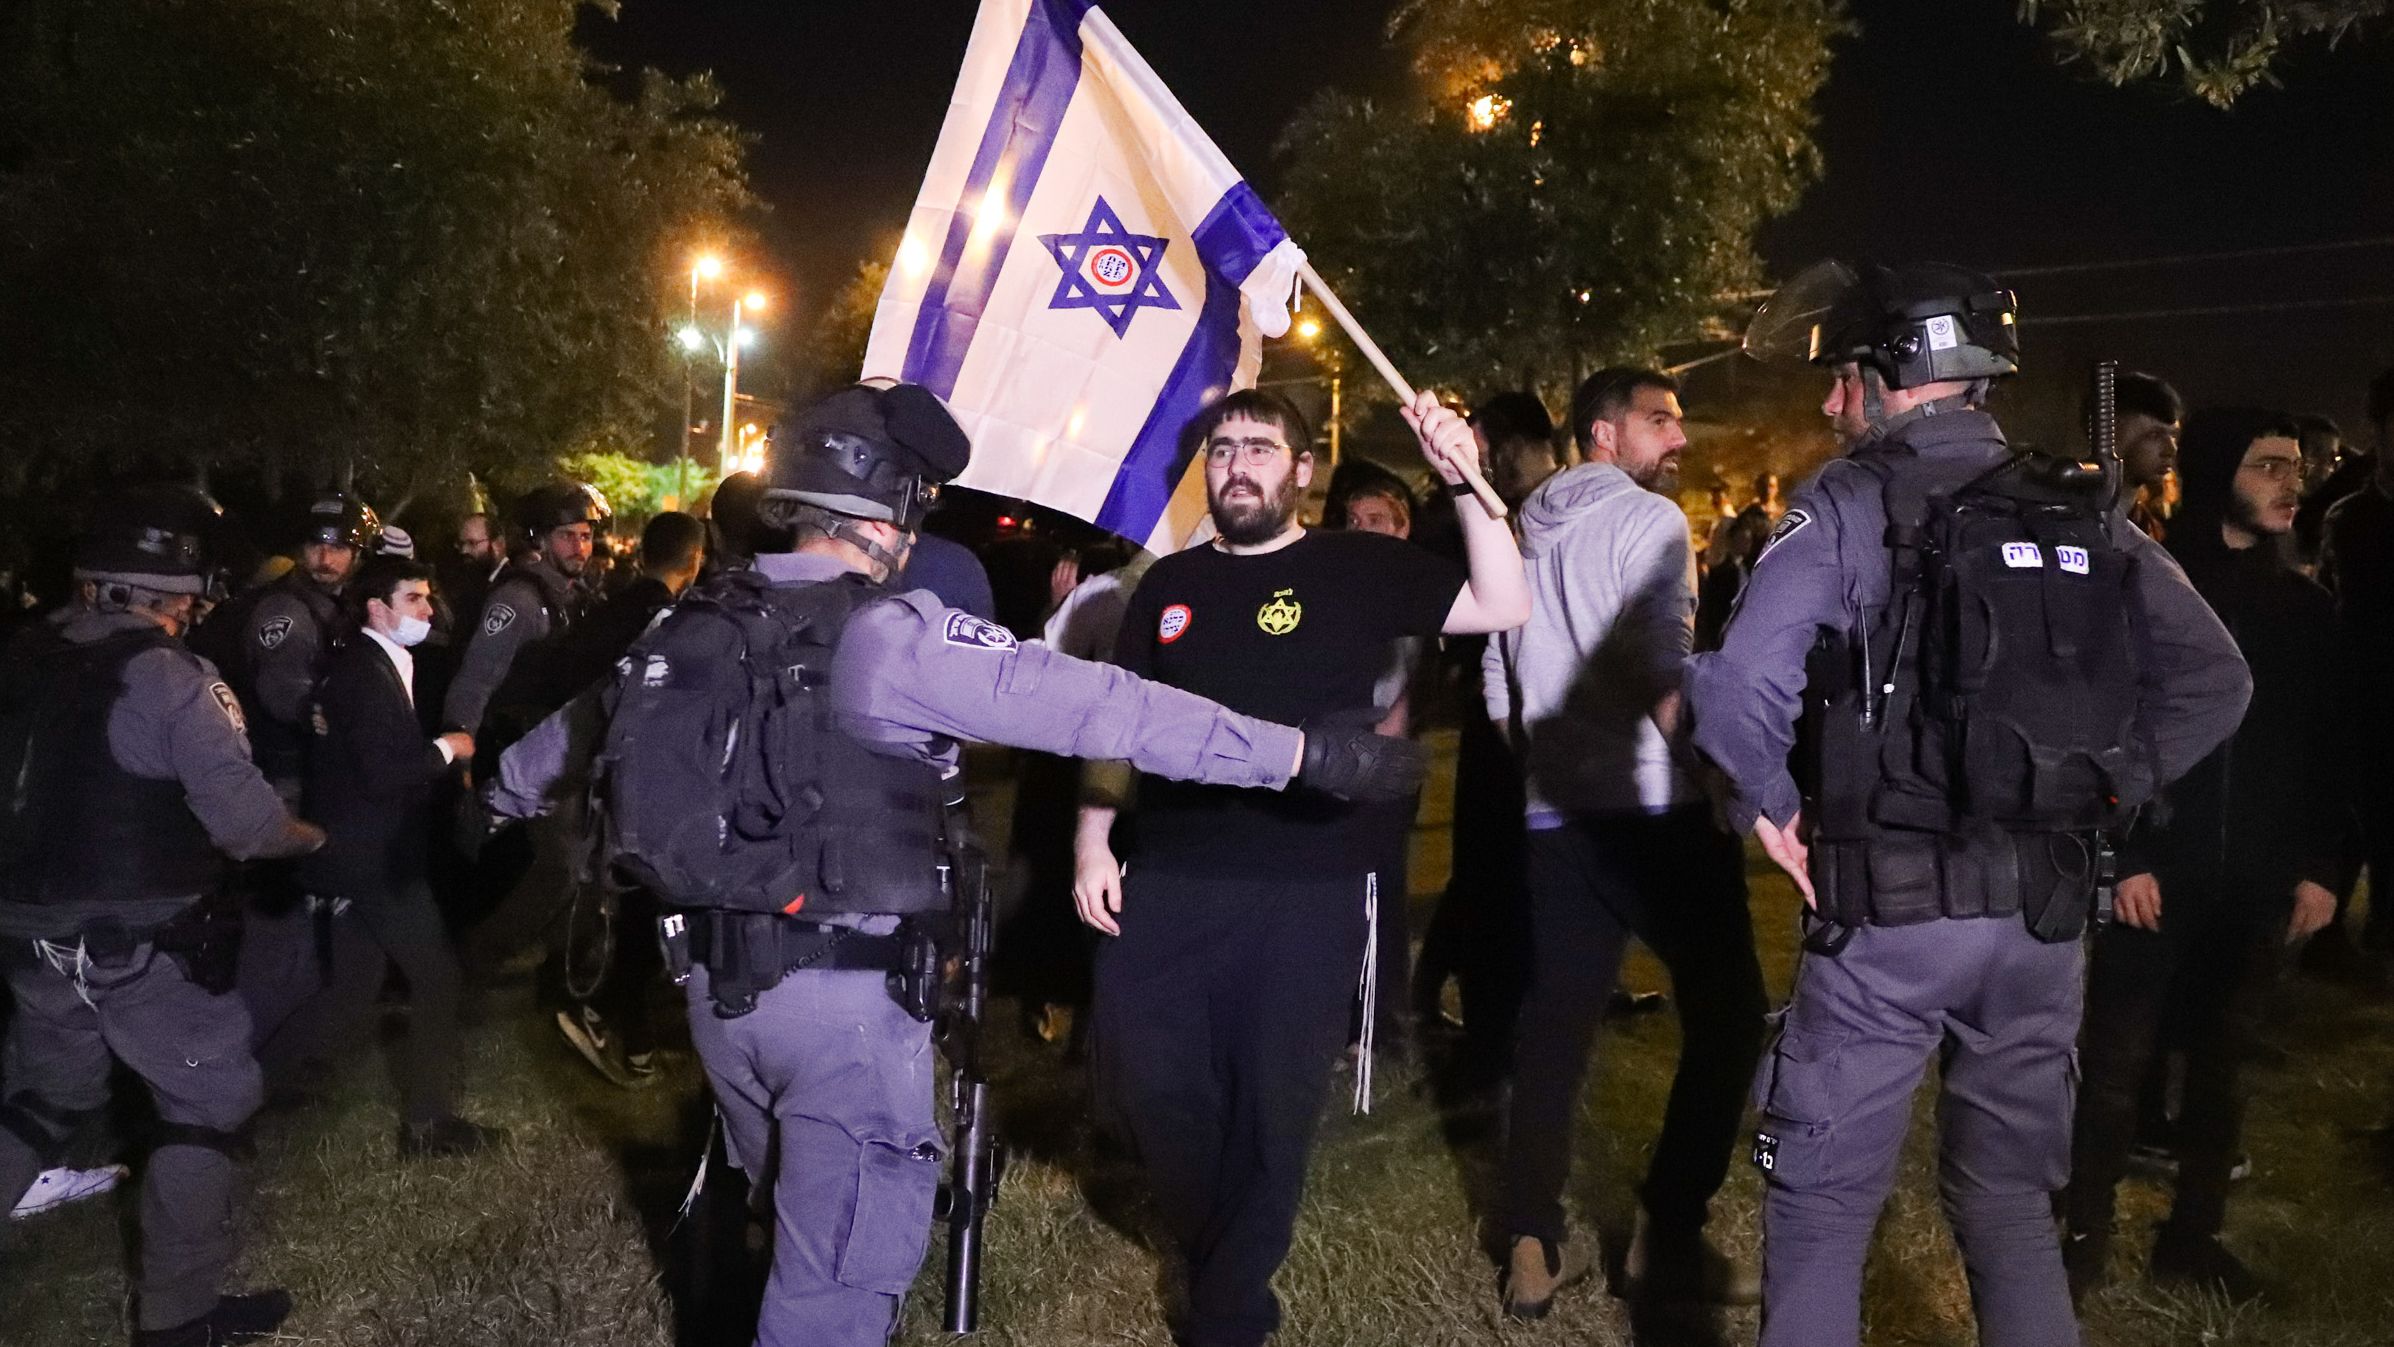 Israeli border police block members of Lehava, a Jewish extremist group, near Damascus Gate amid heightened tensions in the city.